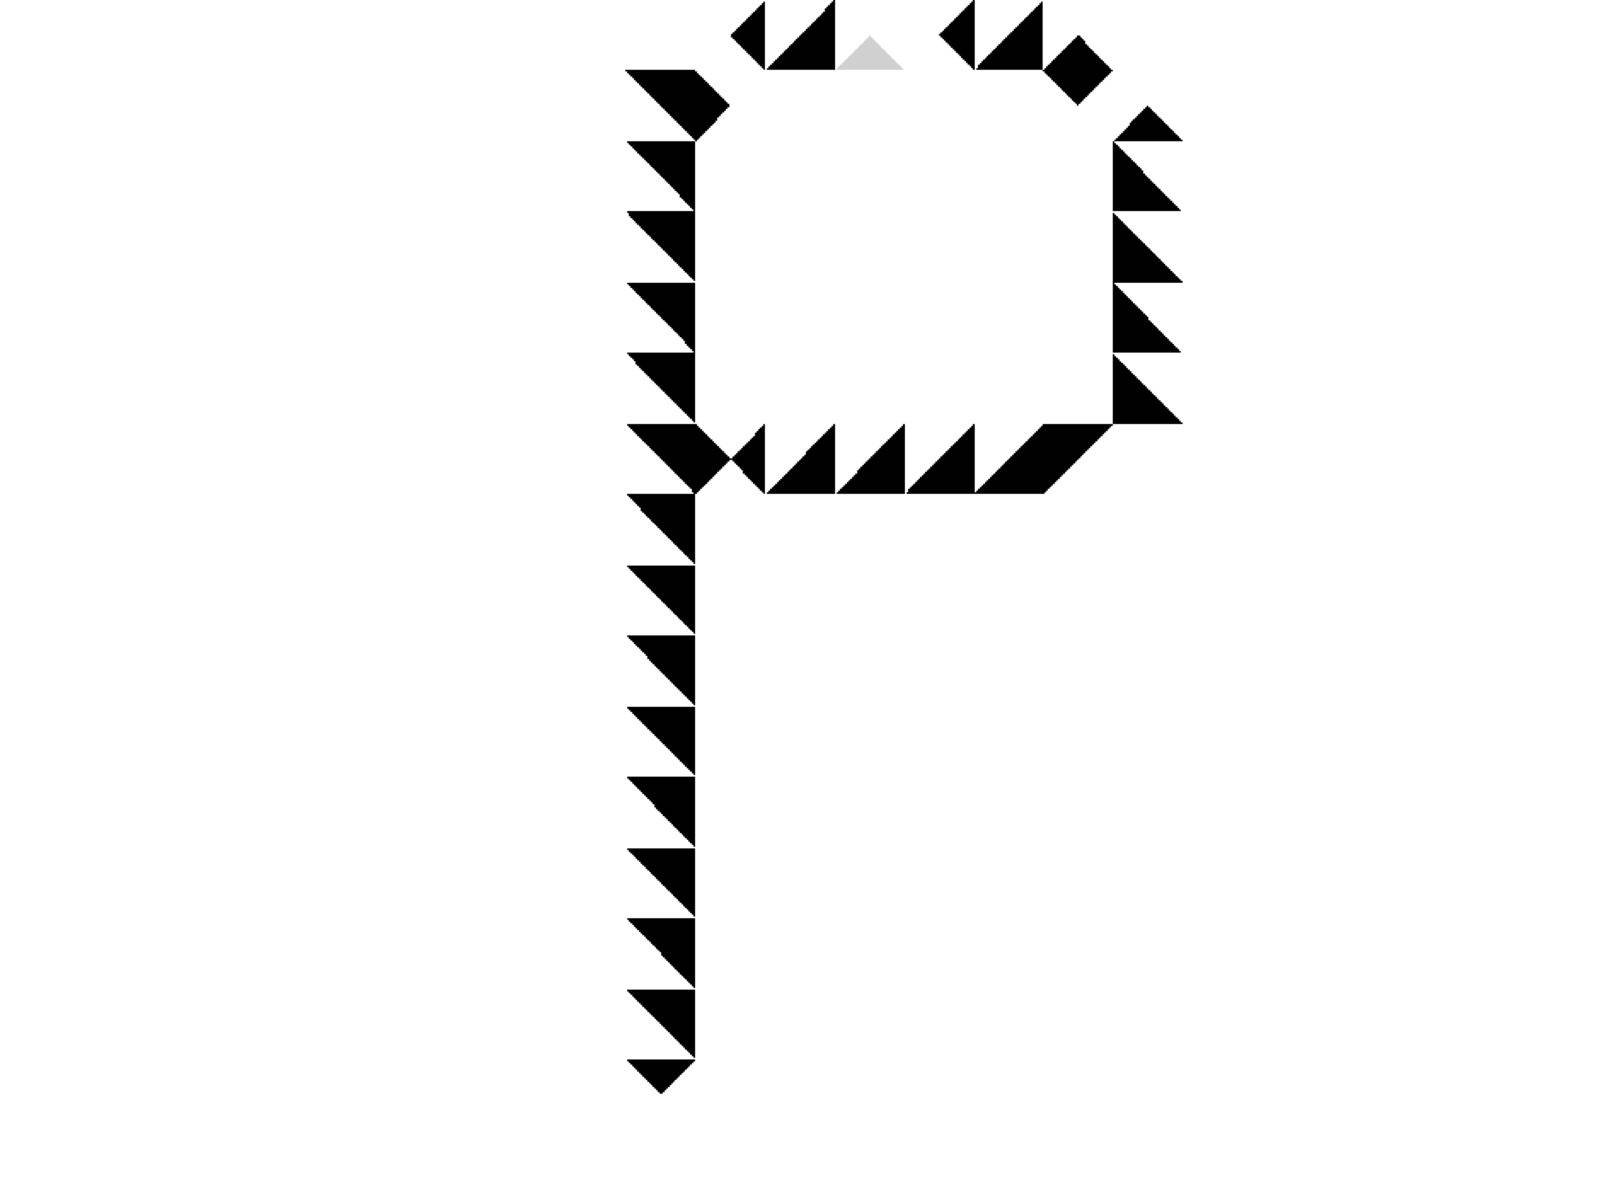 Picture of a letter "P".